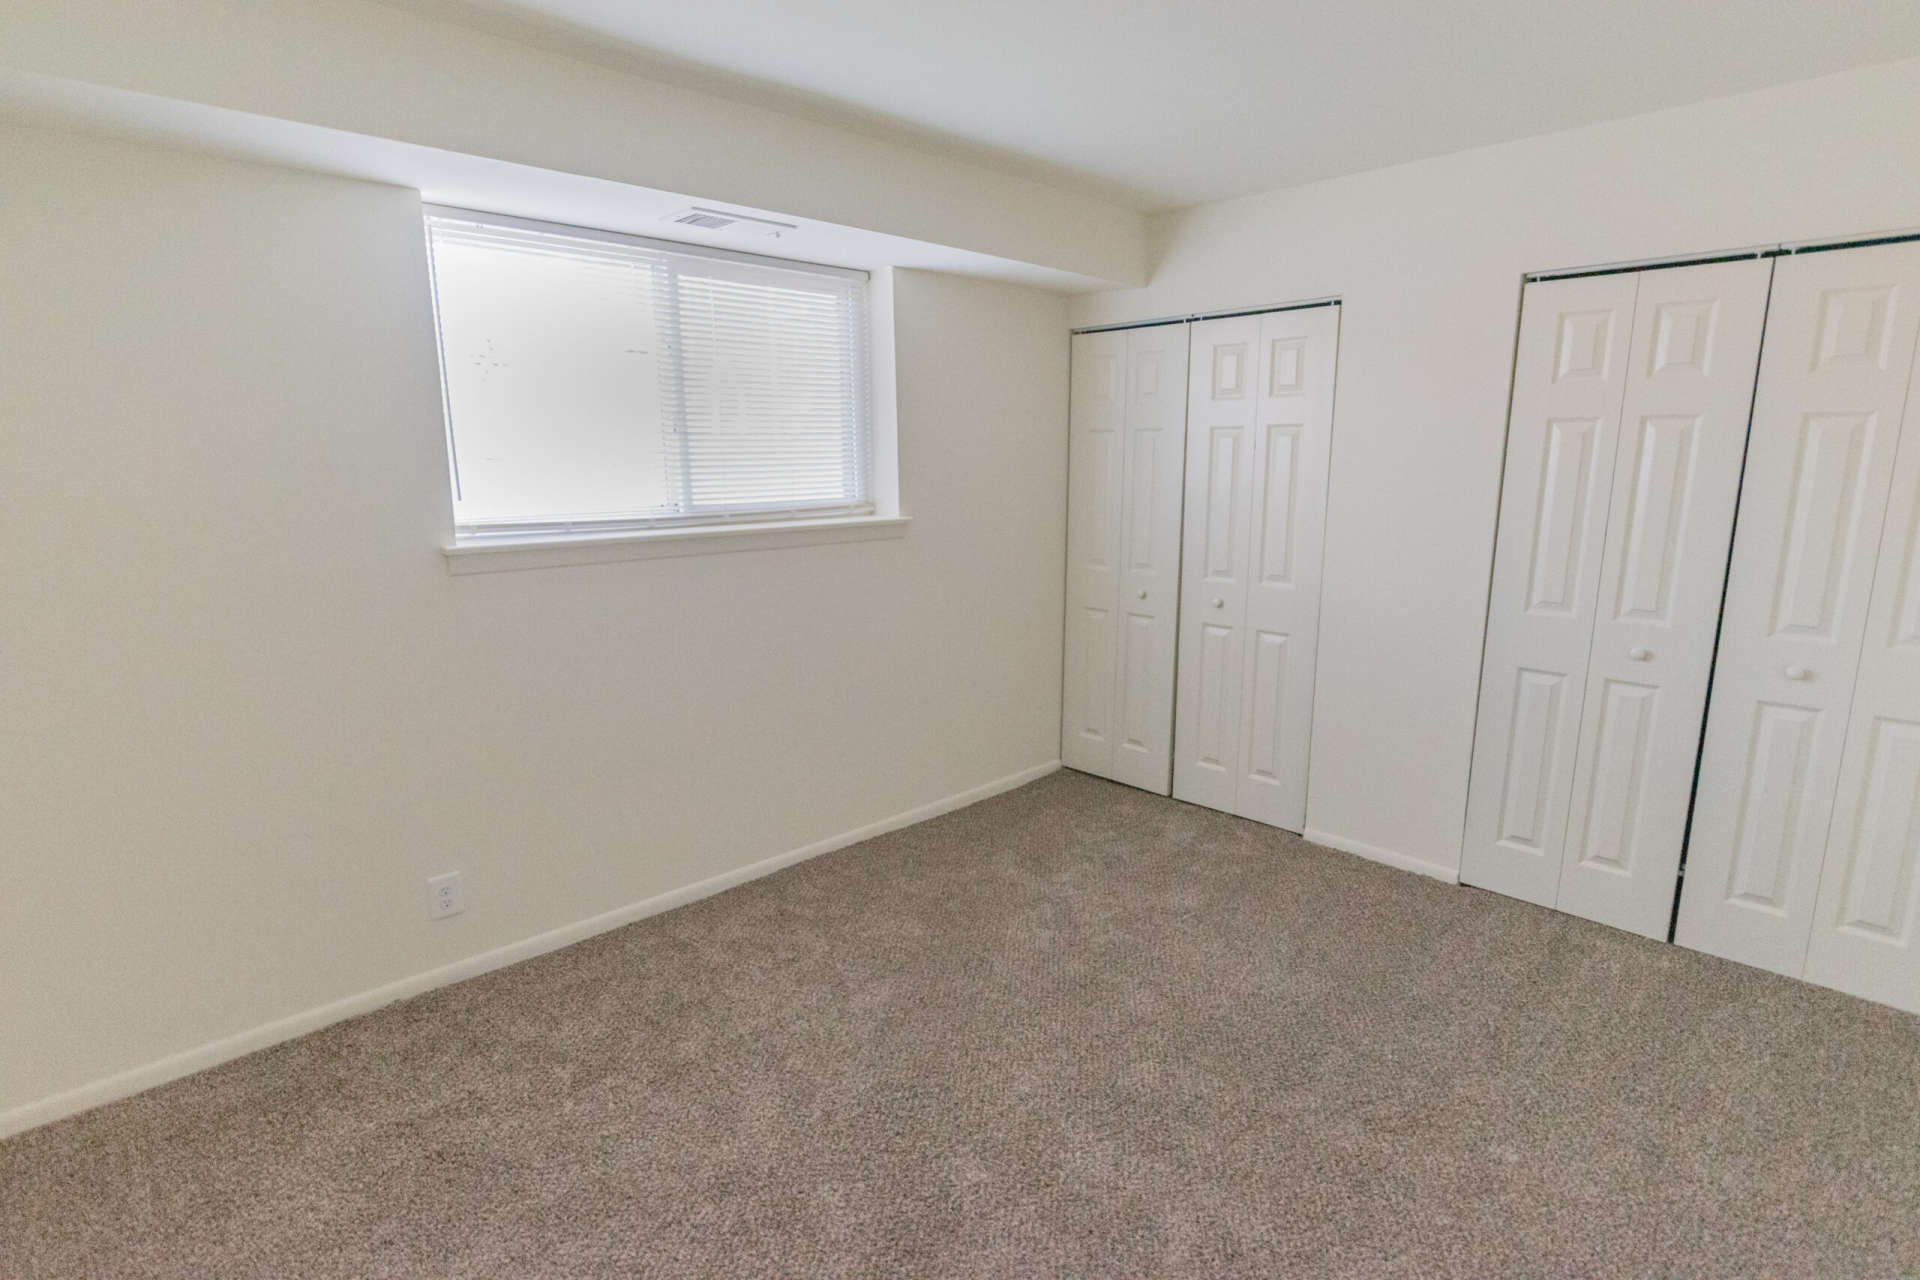 Bedroom with grey carpeting, window, and closet in an apartment at Jamestown Village.